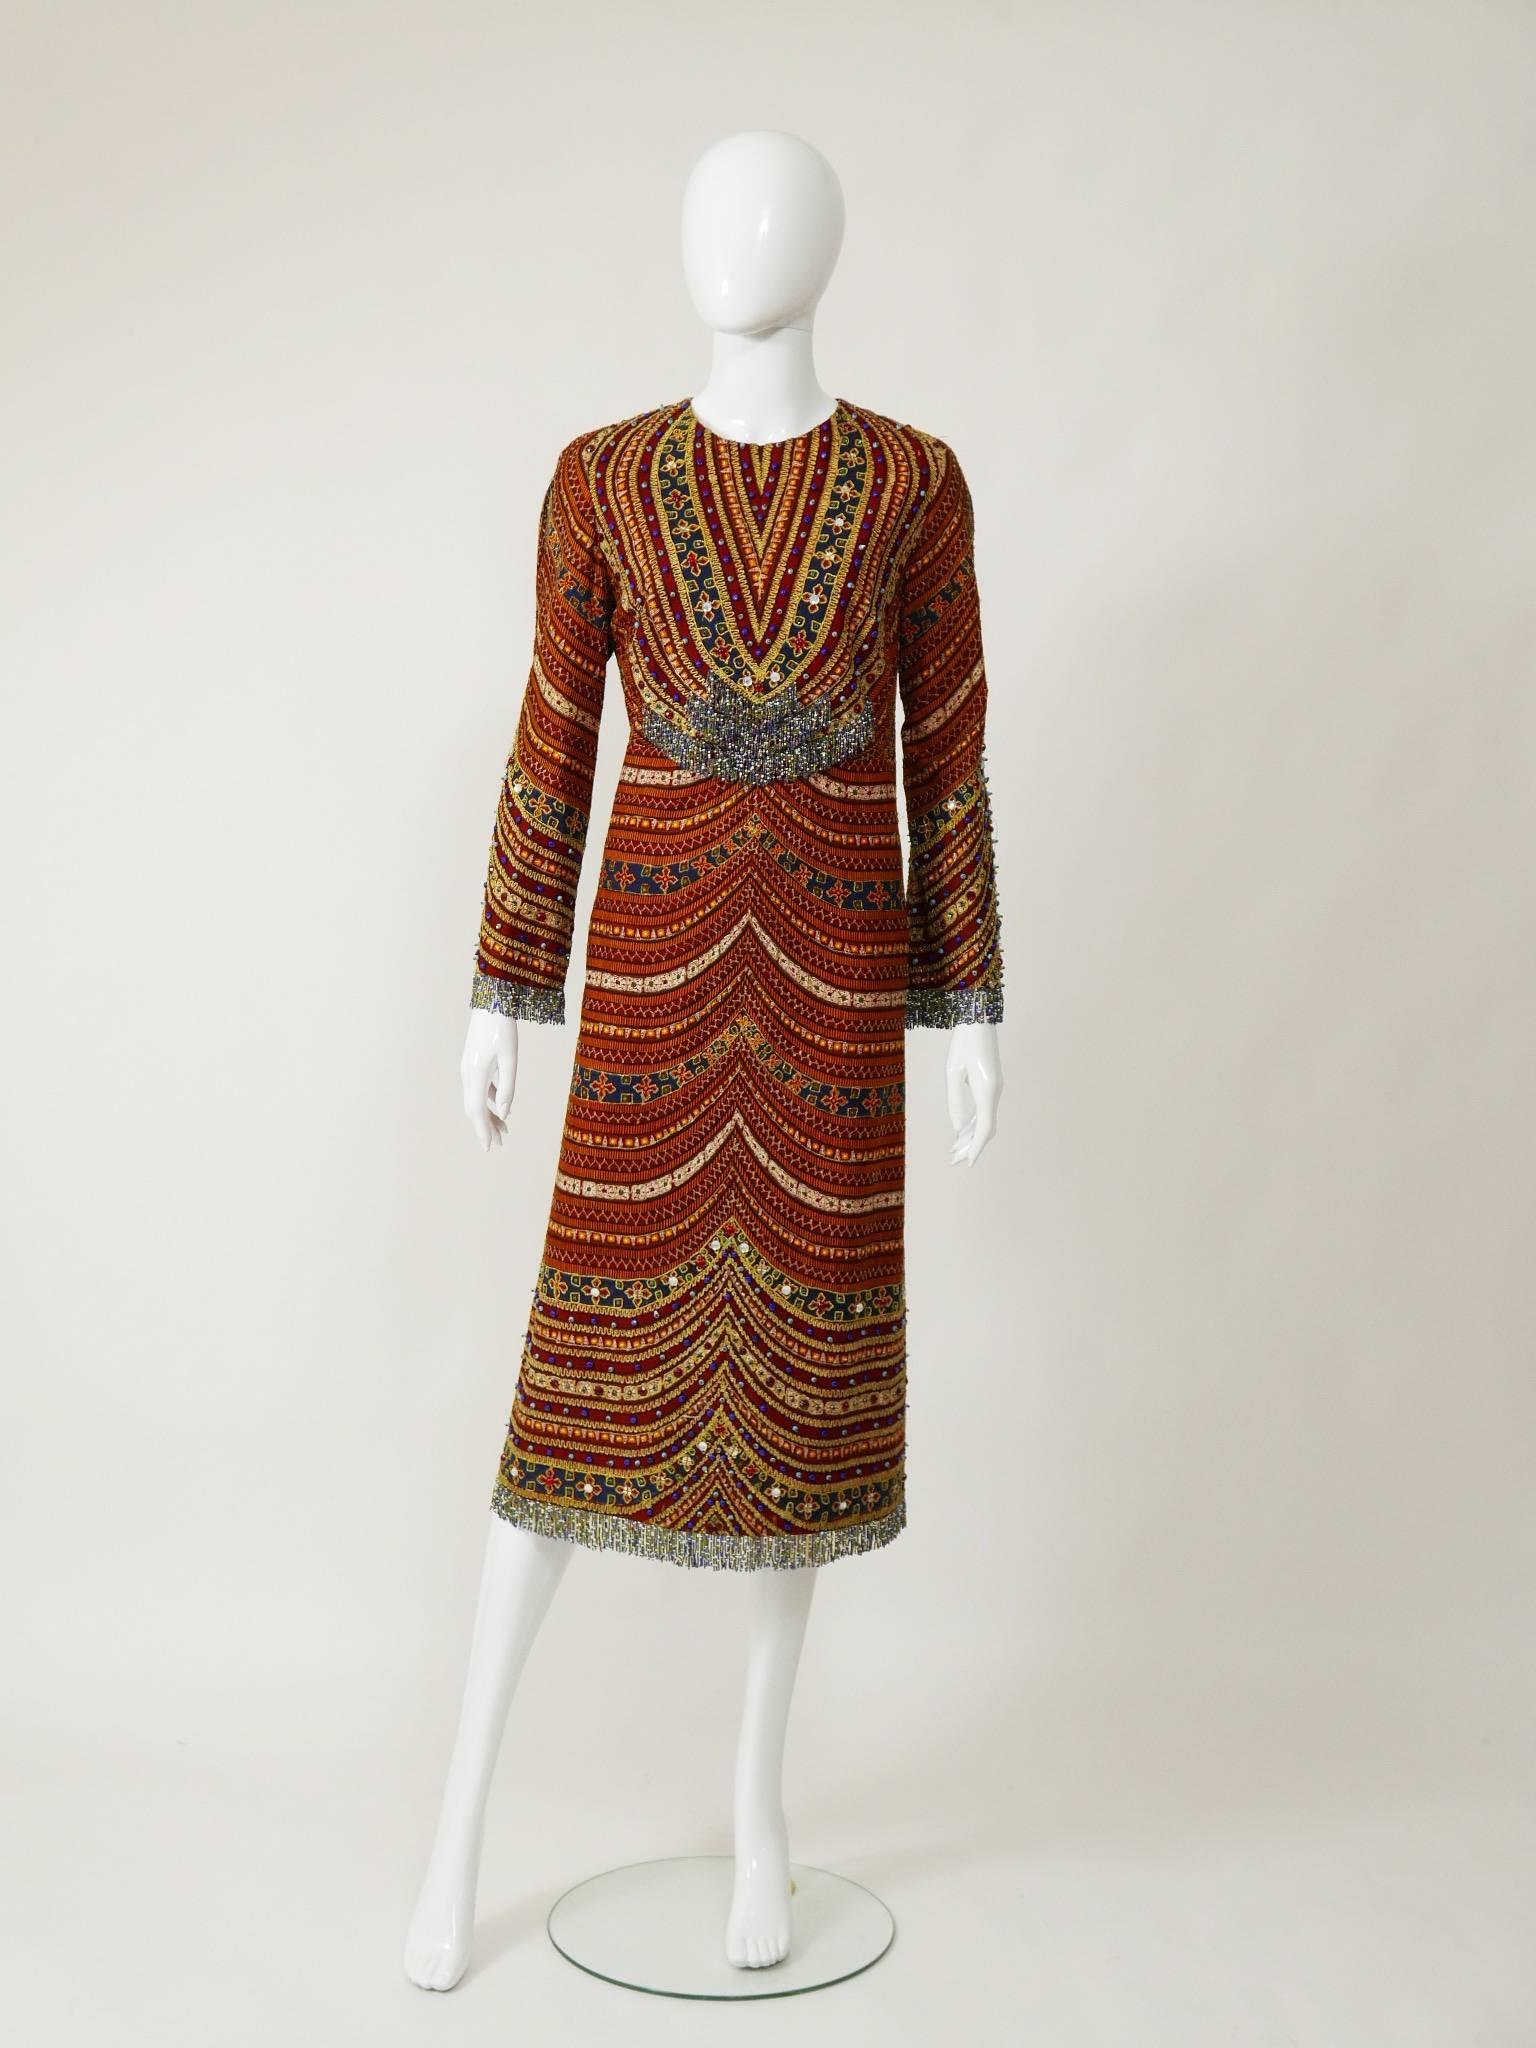 This amazing Pirovano 1970s dress is in a fabulous embroidered beaded ethnic print silk fabric. It has long sleeves with beaded fringes and back zip closure. It's fully satin lined.

Good vintage condition

Label: PIROVANO Milano
Fabric: